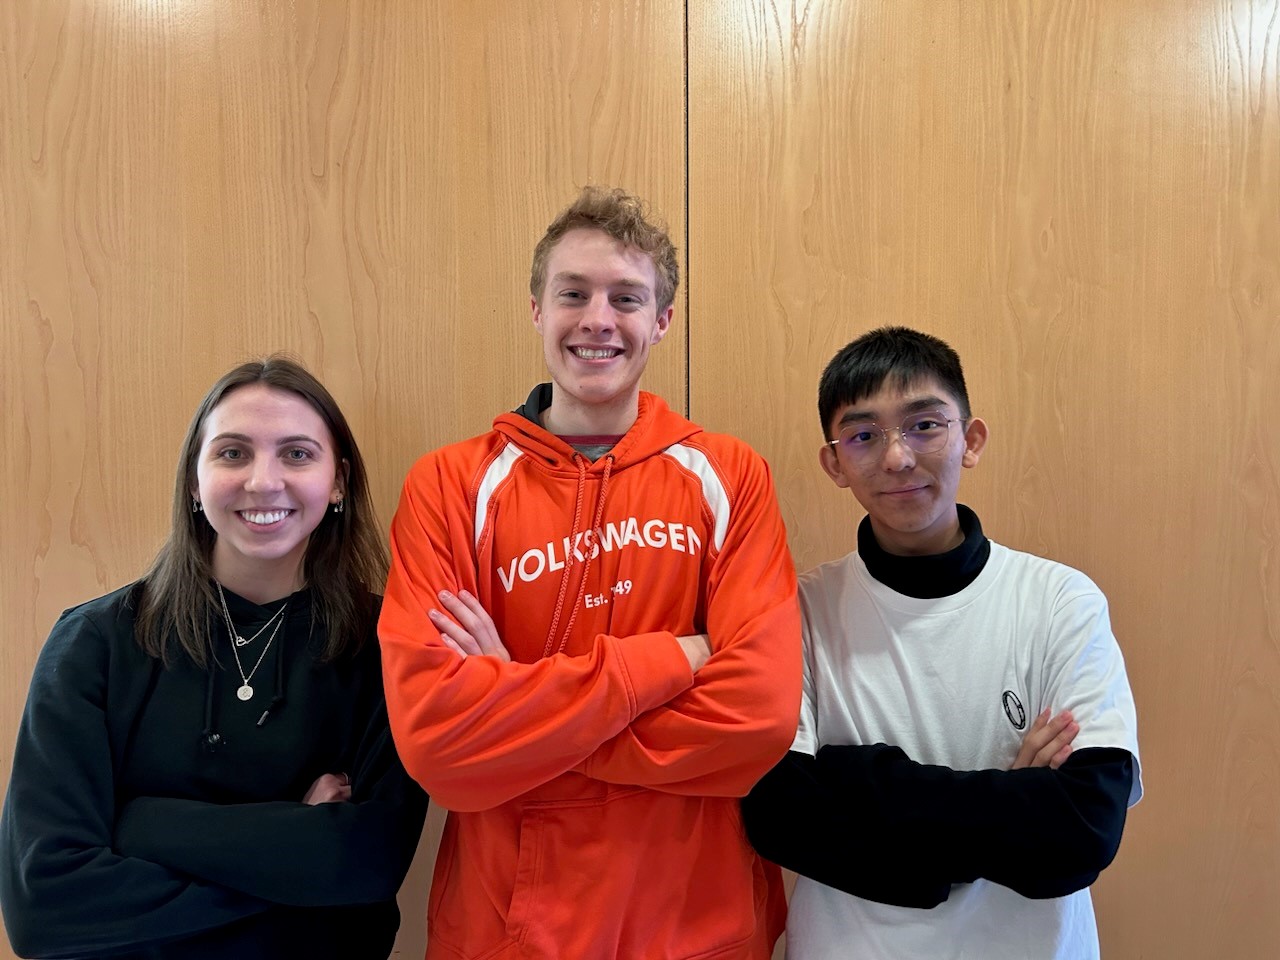 (Left to Right): Emily Wheat, Tyler Anderson, Emilio Lim